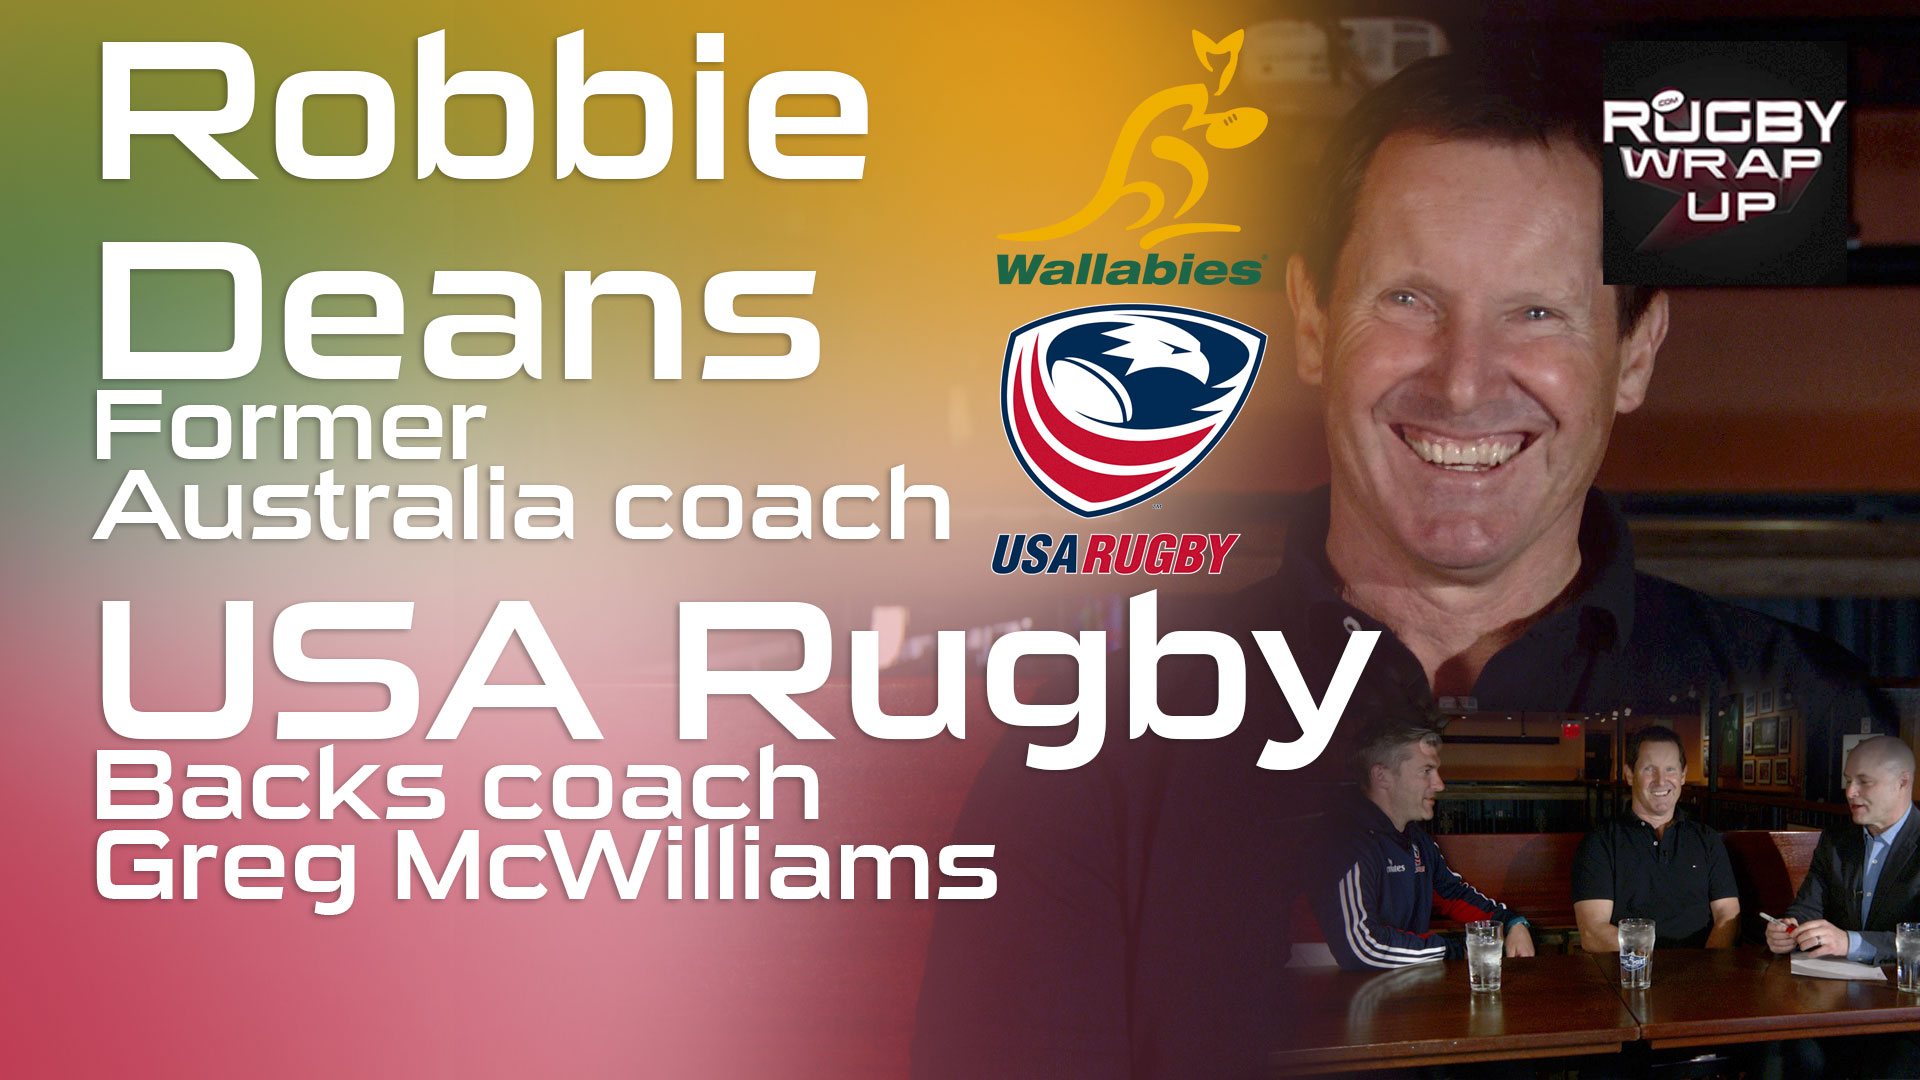 Robbie Deans and USA Rugby & Yale Coach, Greg McWilliams